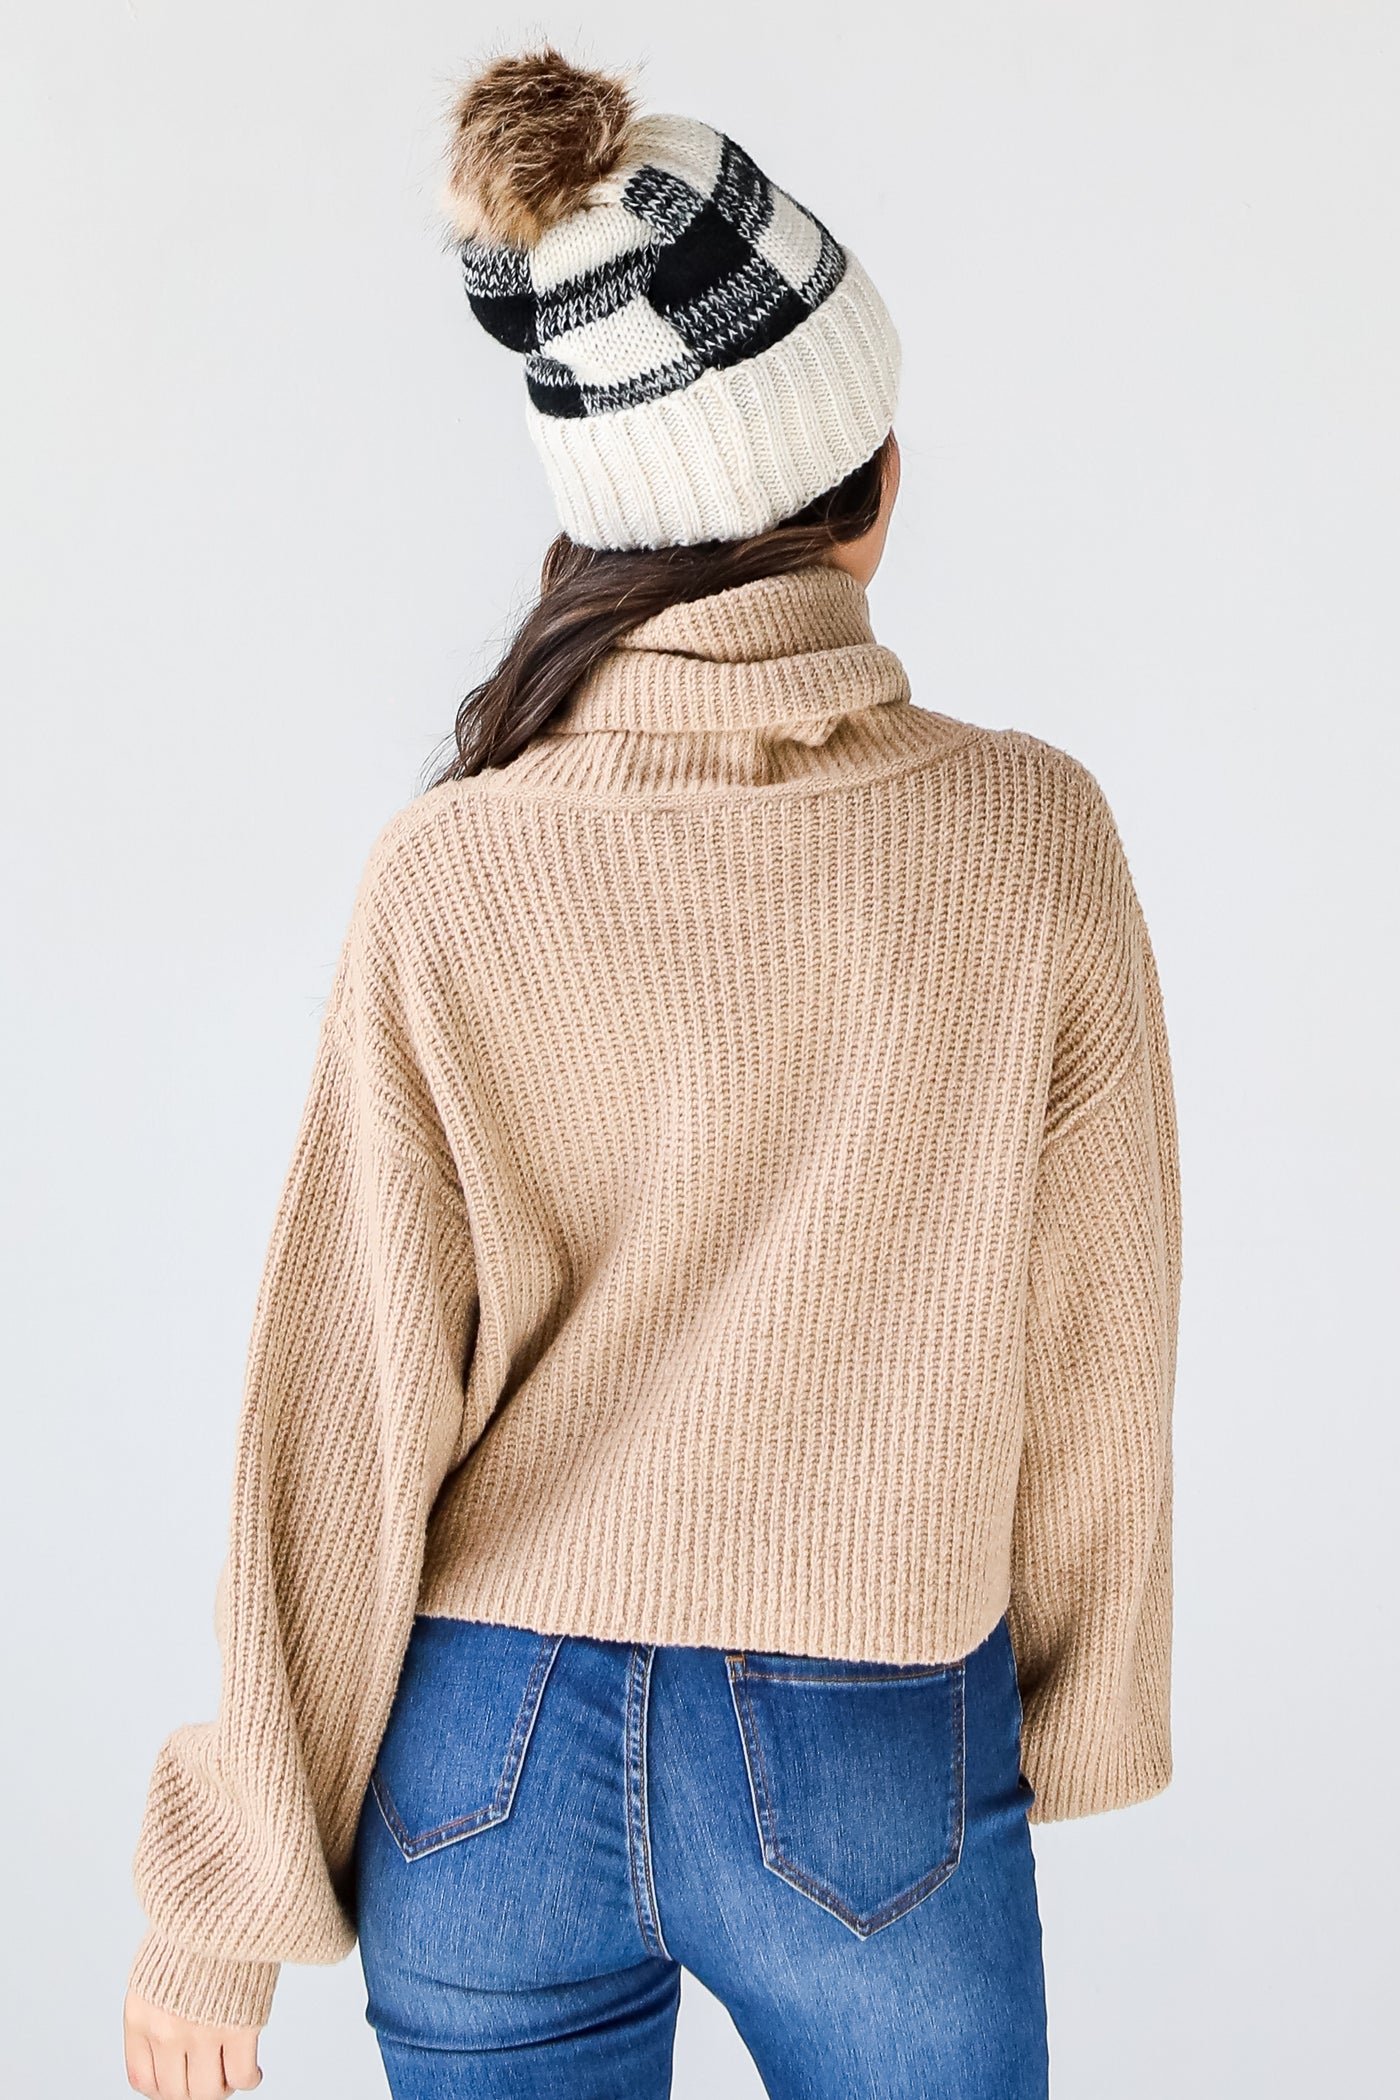 Turtleneck Sweater back view